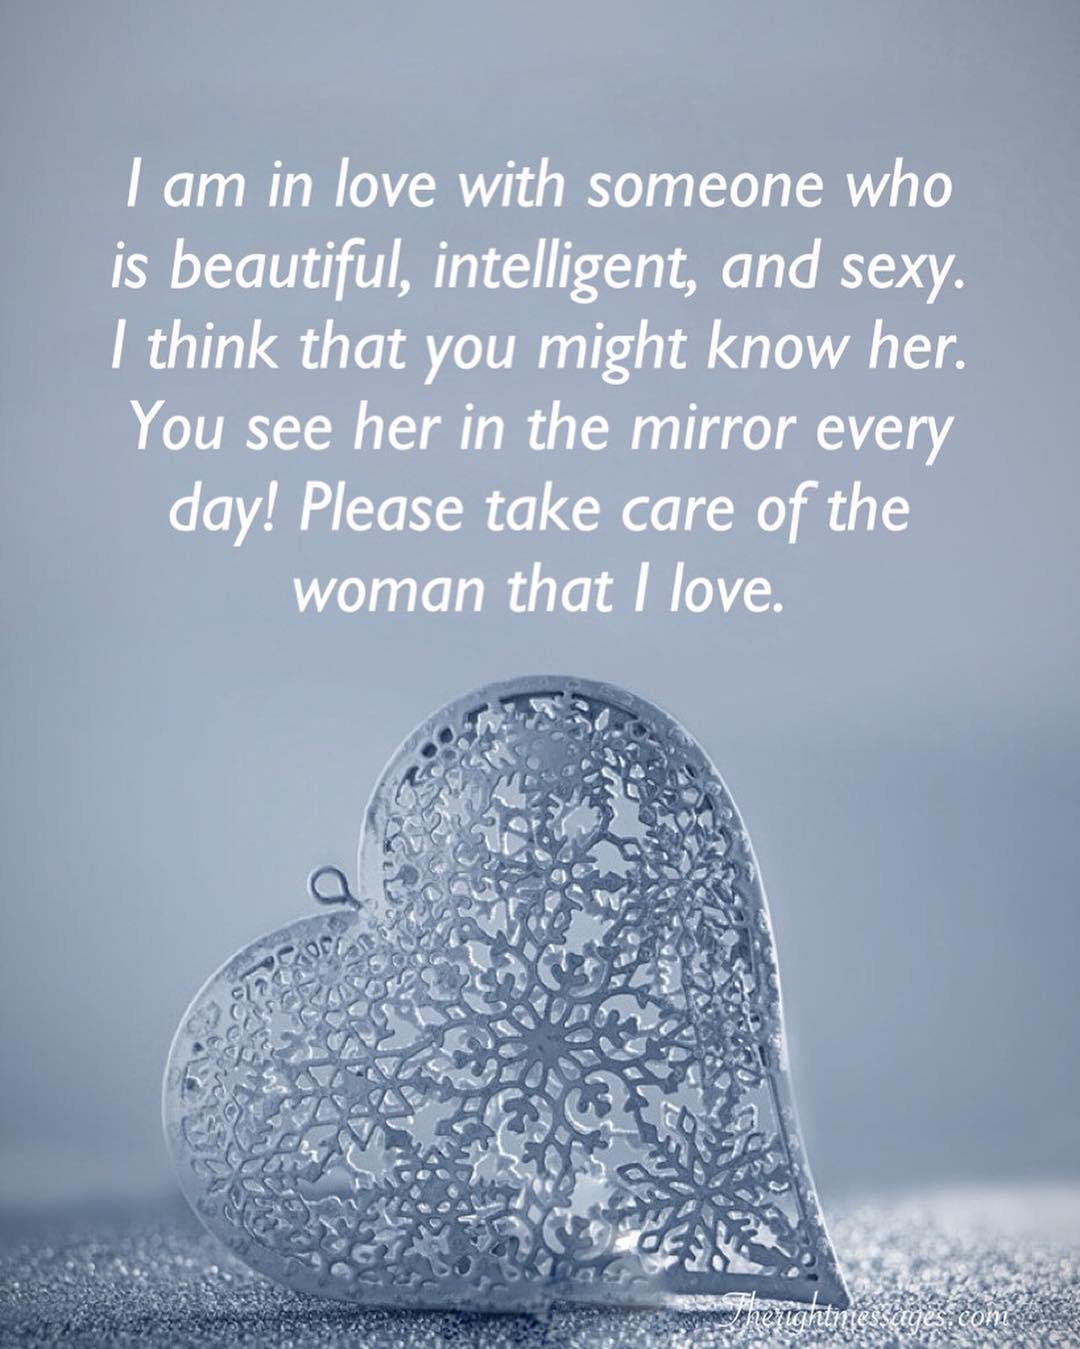 Romantic Take Care Messages for Her